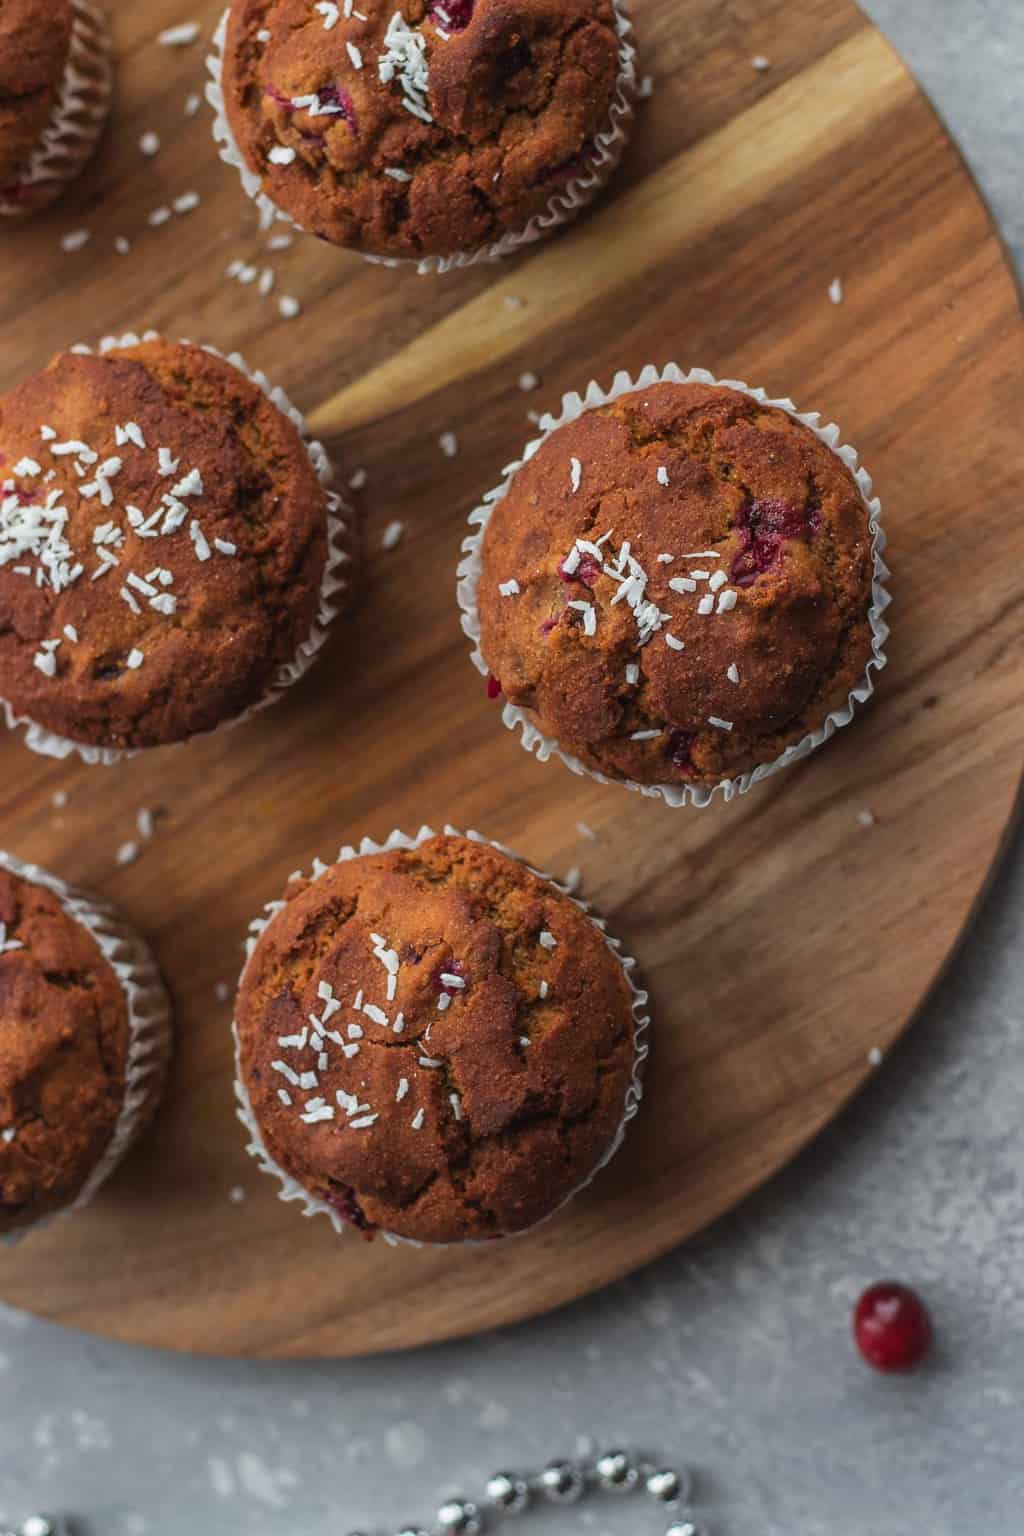 muffins topped with coconut and cranberries